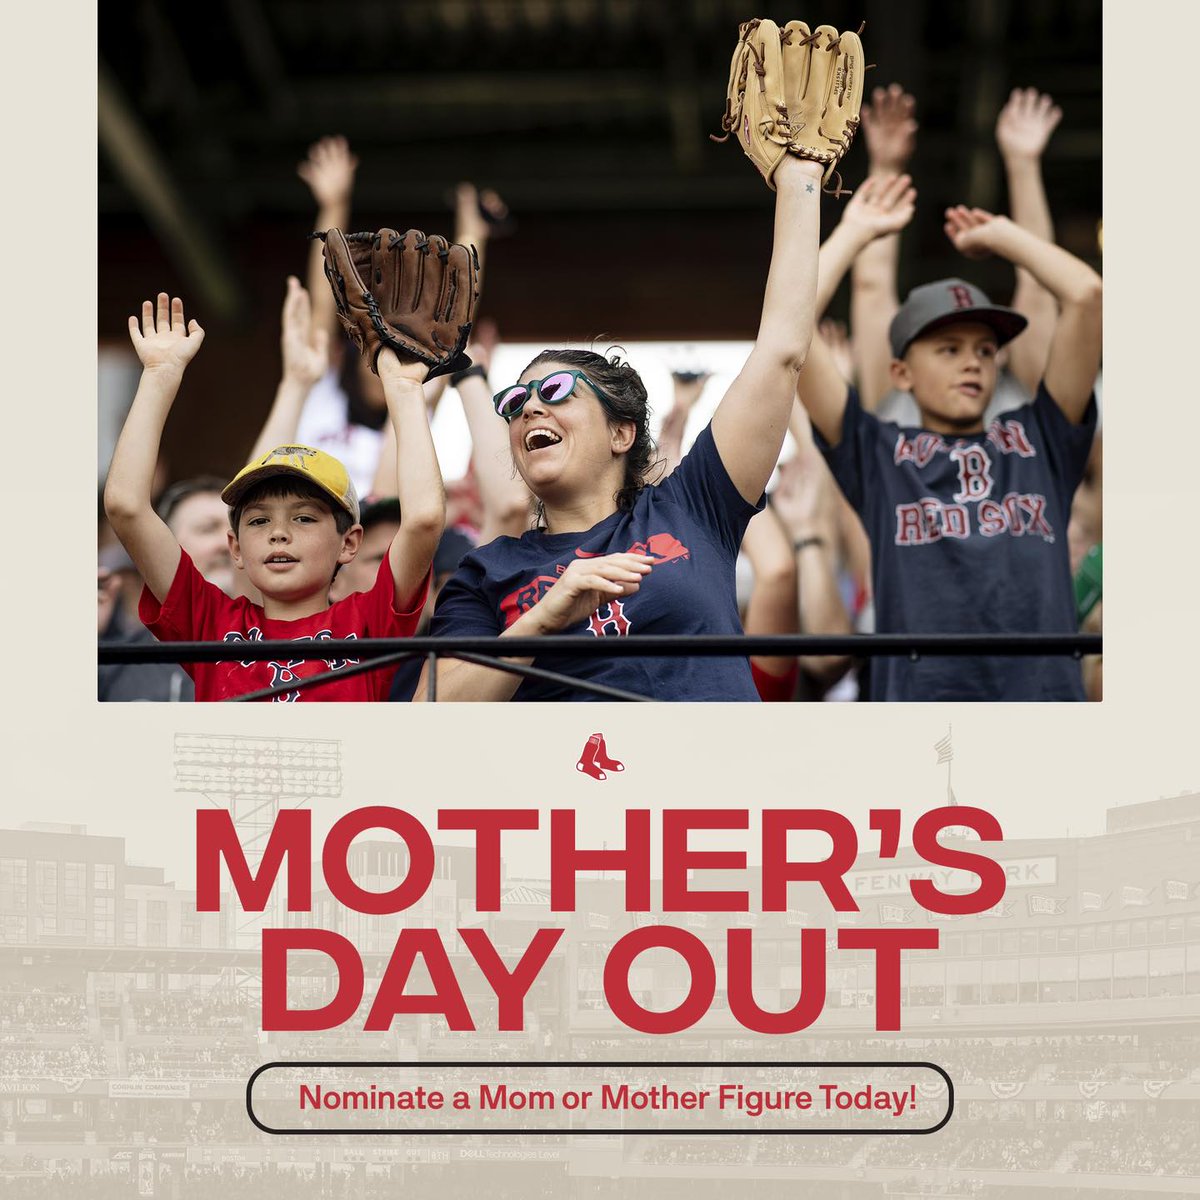 It's the final night to nominate your mom or a mother figure in your life for a chance to win the ultimate Mother's Day experience at Fenway! Nominate & see full rules: redsox.com/mothersdayout